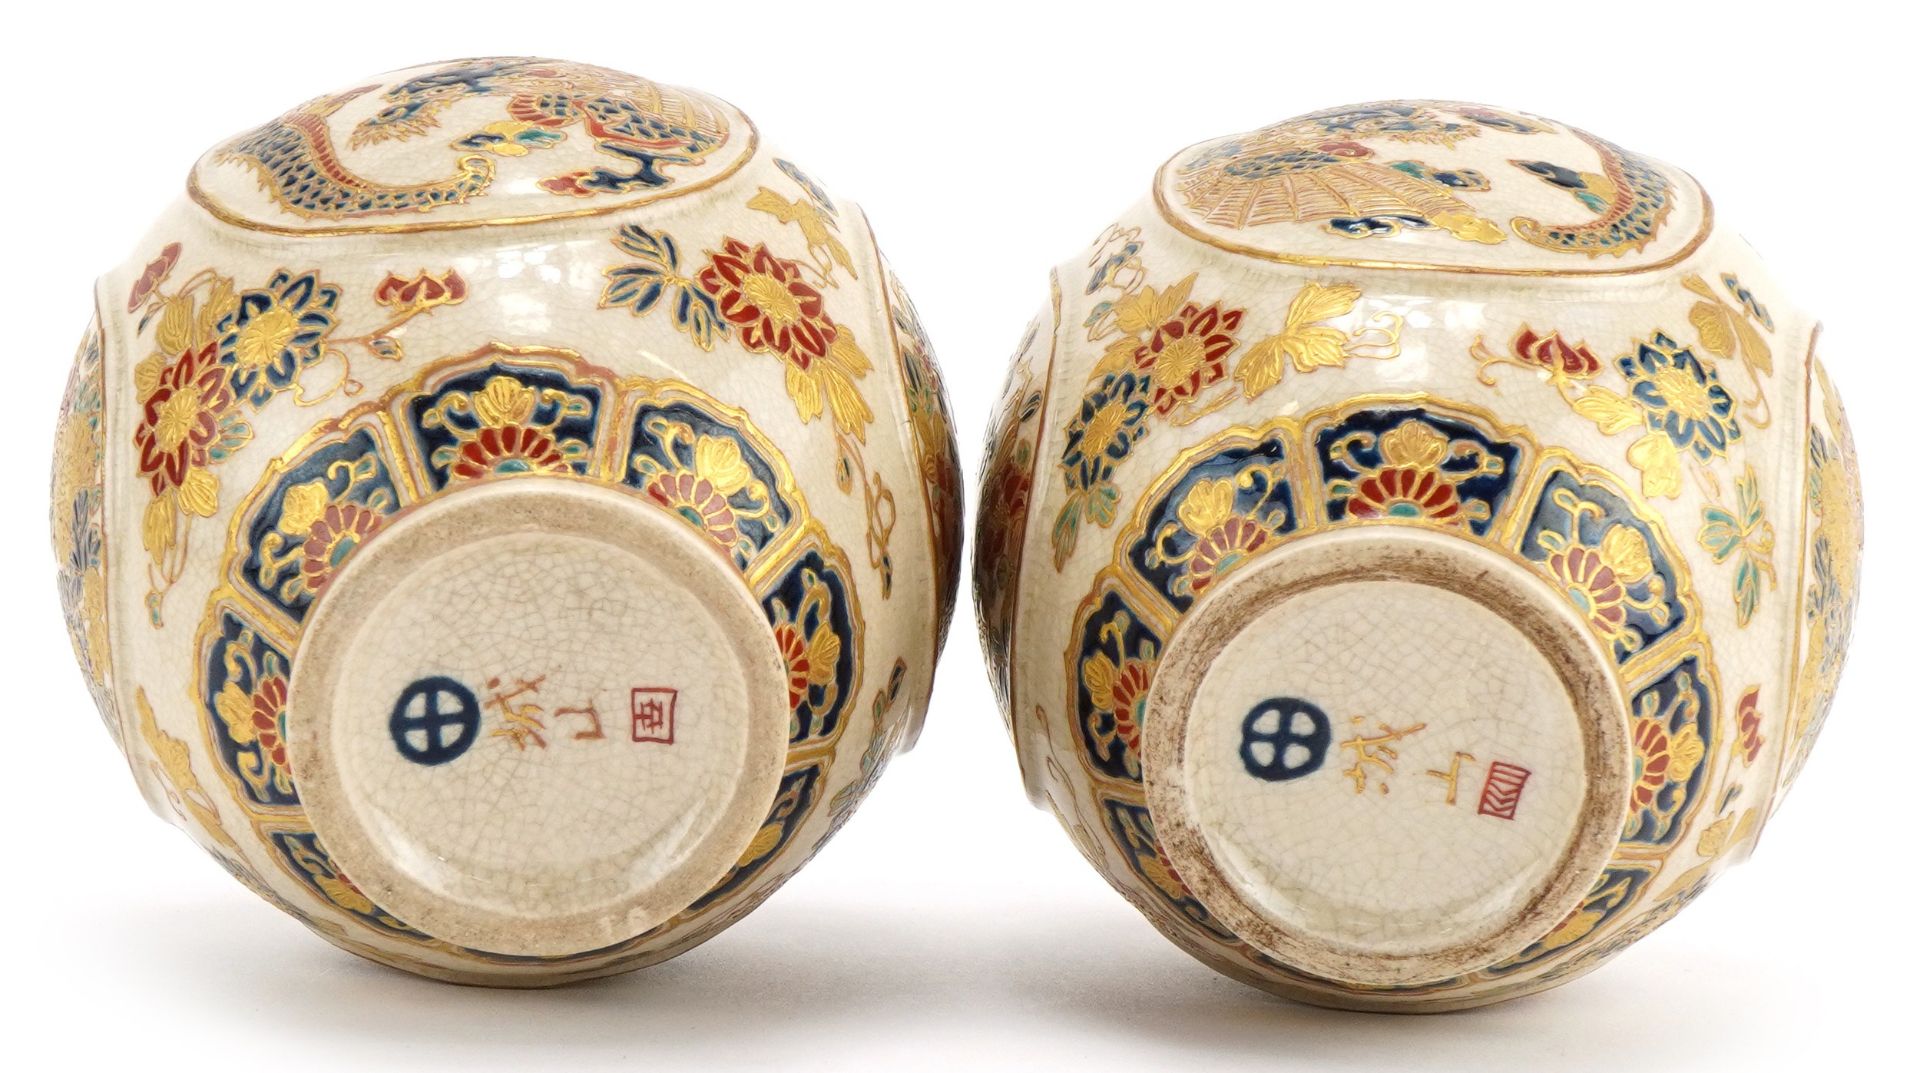 Pair of Japanese Satsuma pottery vases finely gilded with panels of dragons and flowers, character - Image 3 of 6